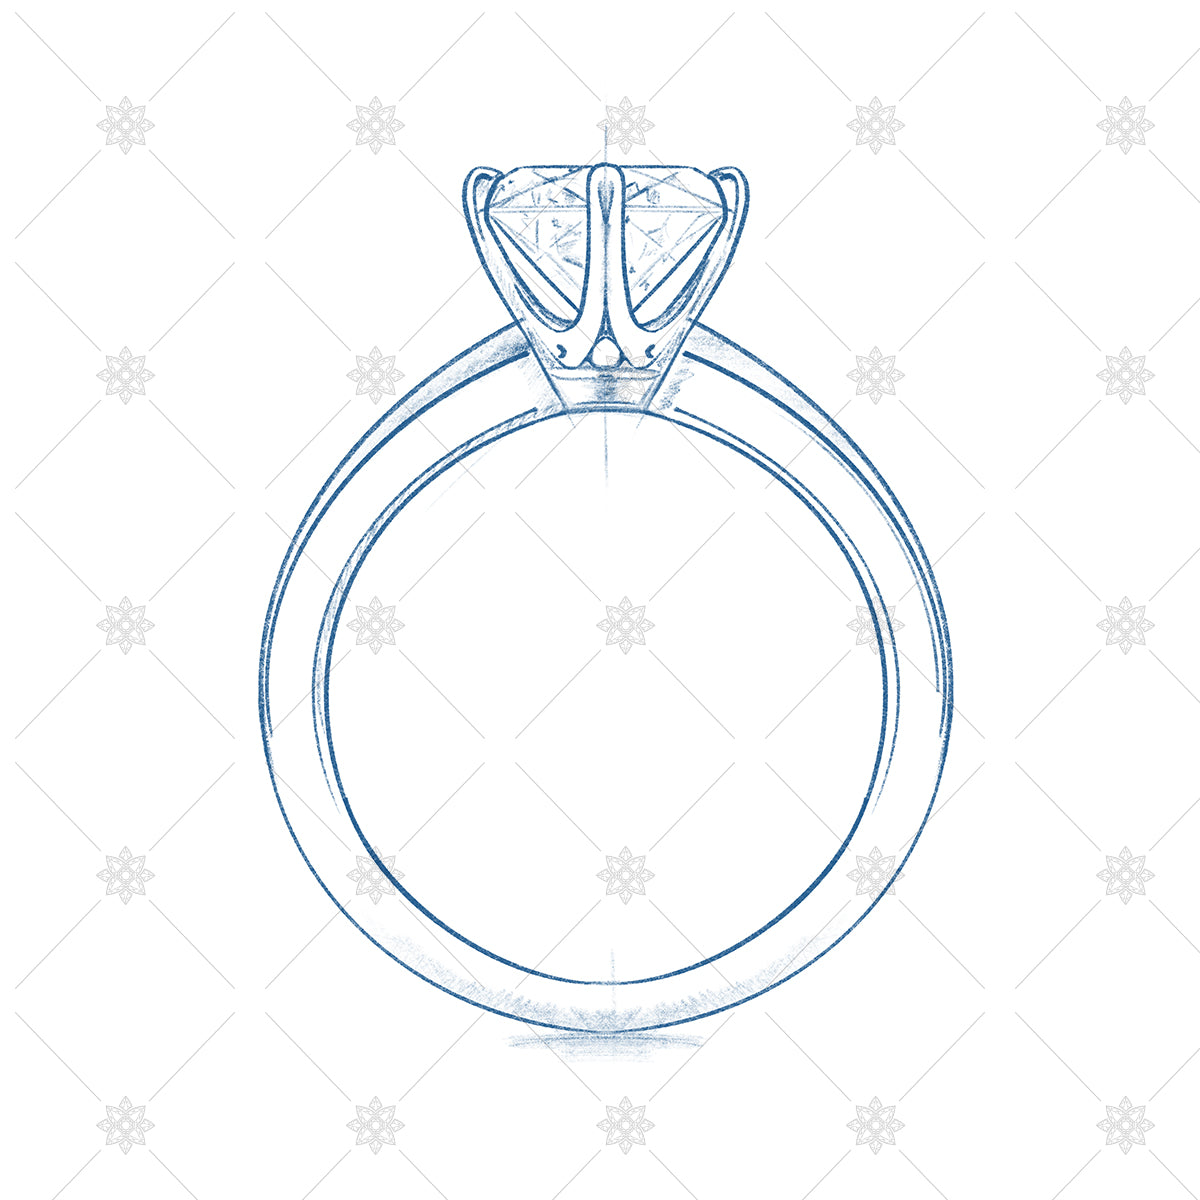 tiffany ring sketch and design